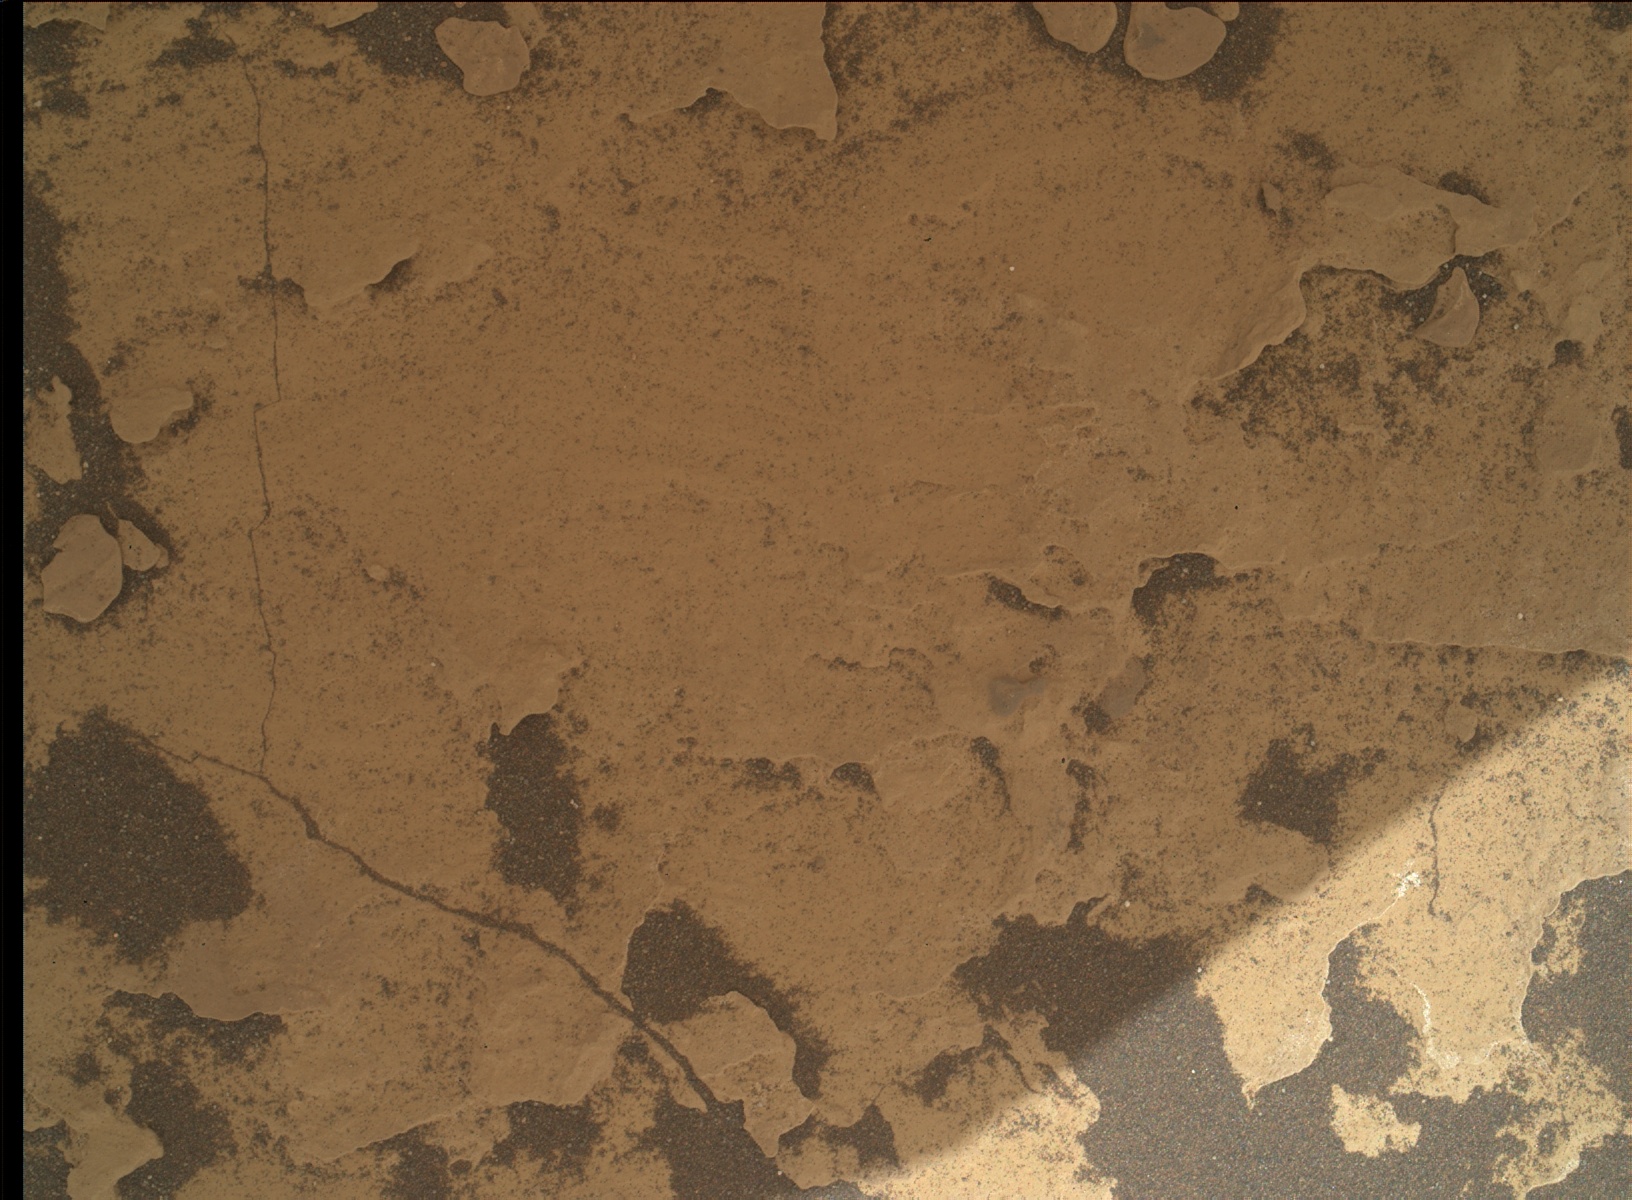 Nasa's Mars rover Curiosity acquired this image using its Mars Hand Lens Imager (MAHLI) on Sol 1700